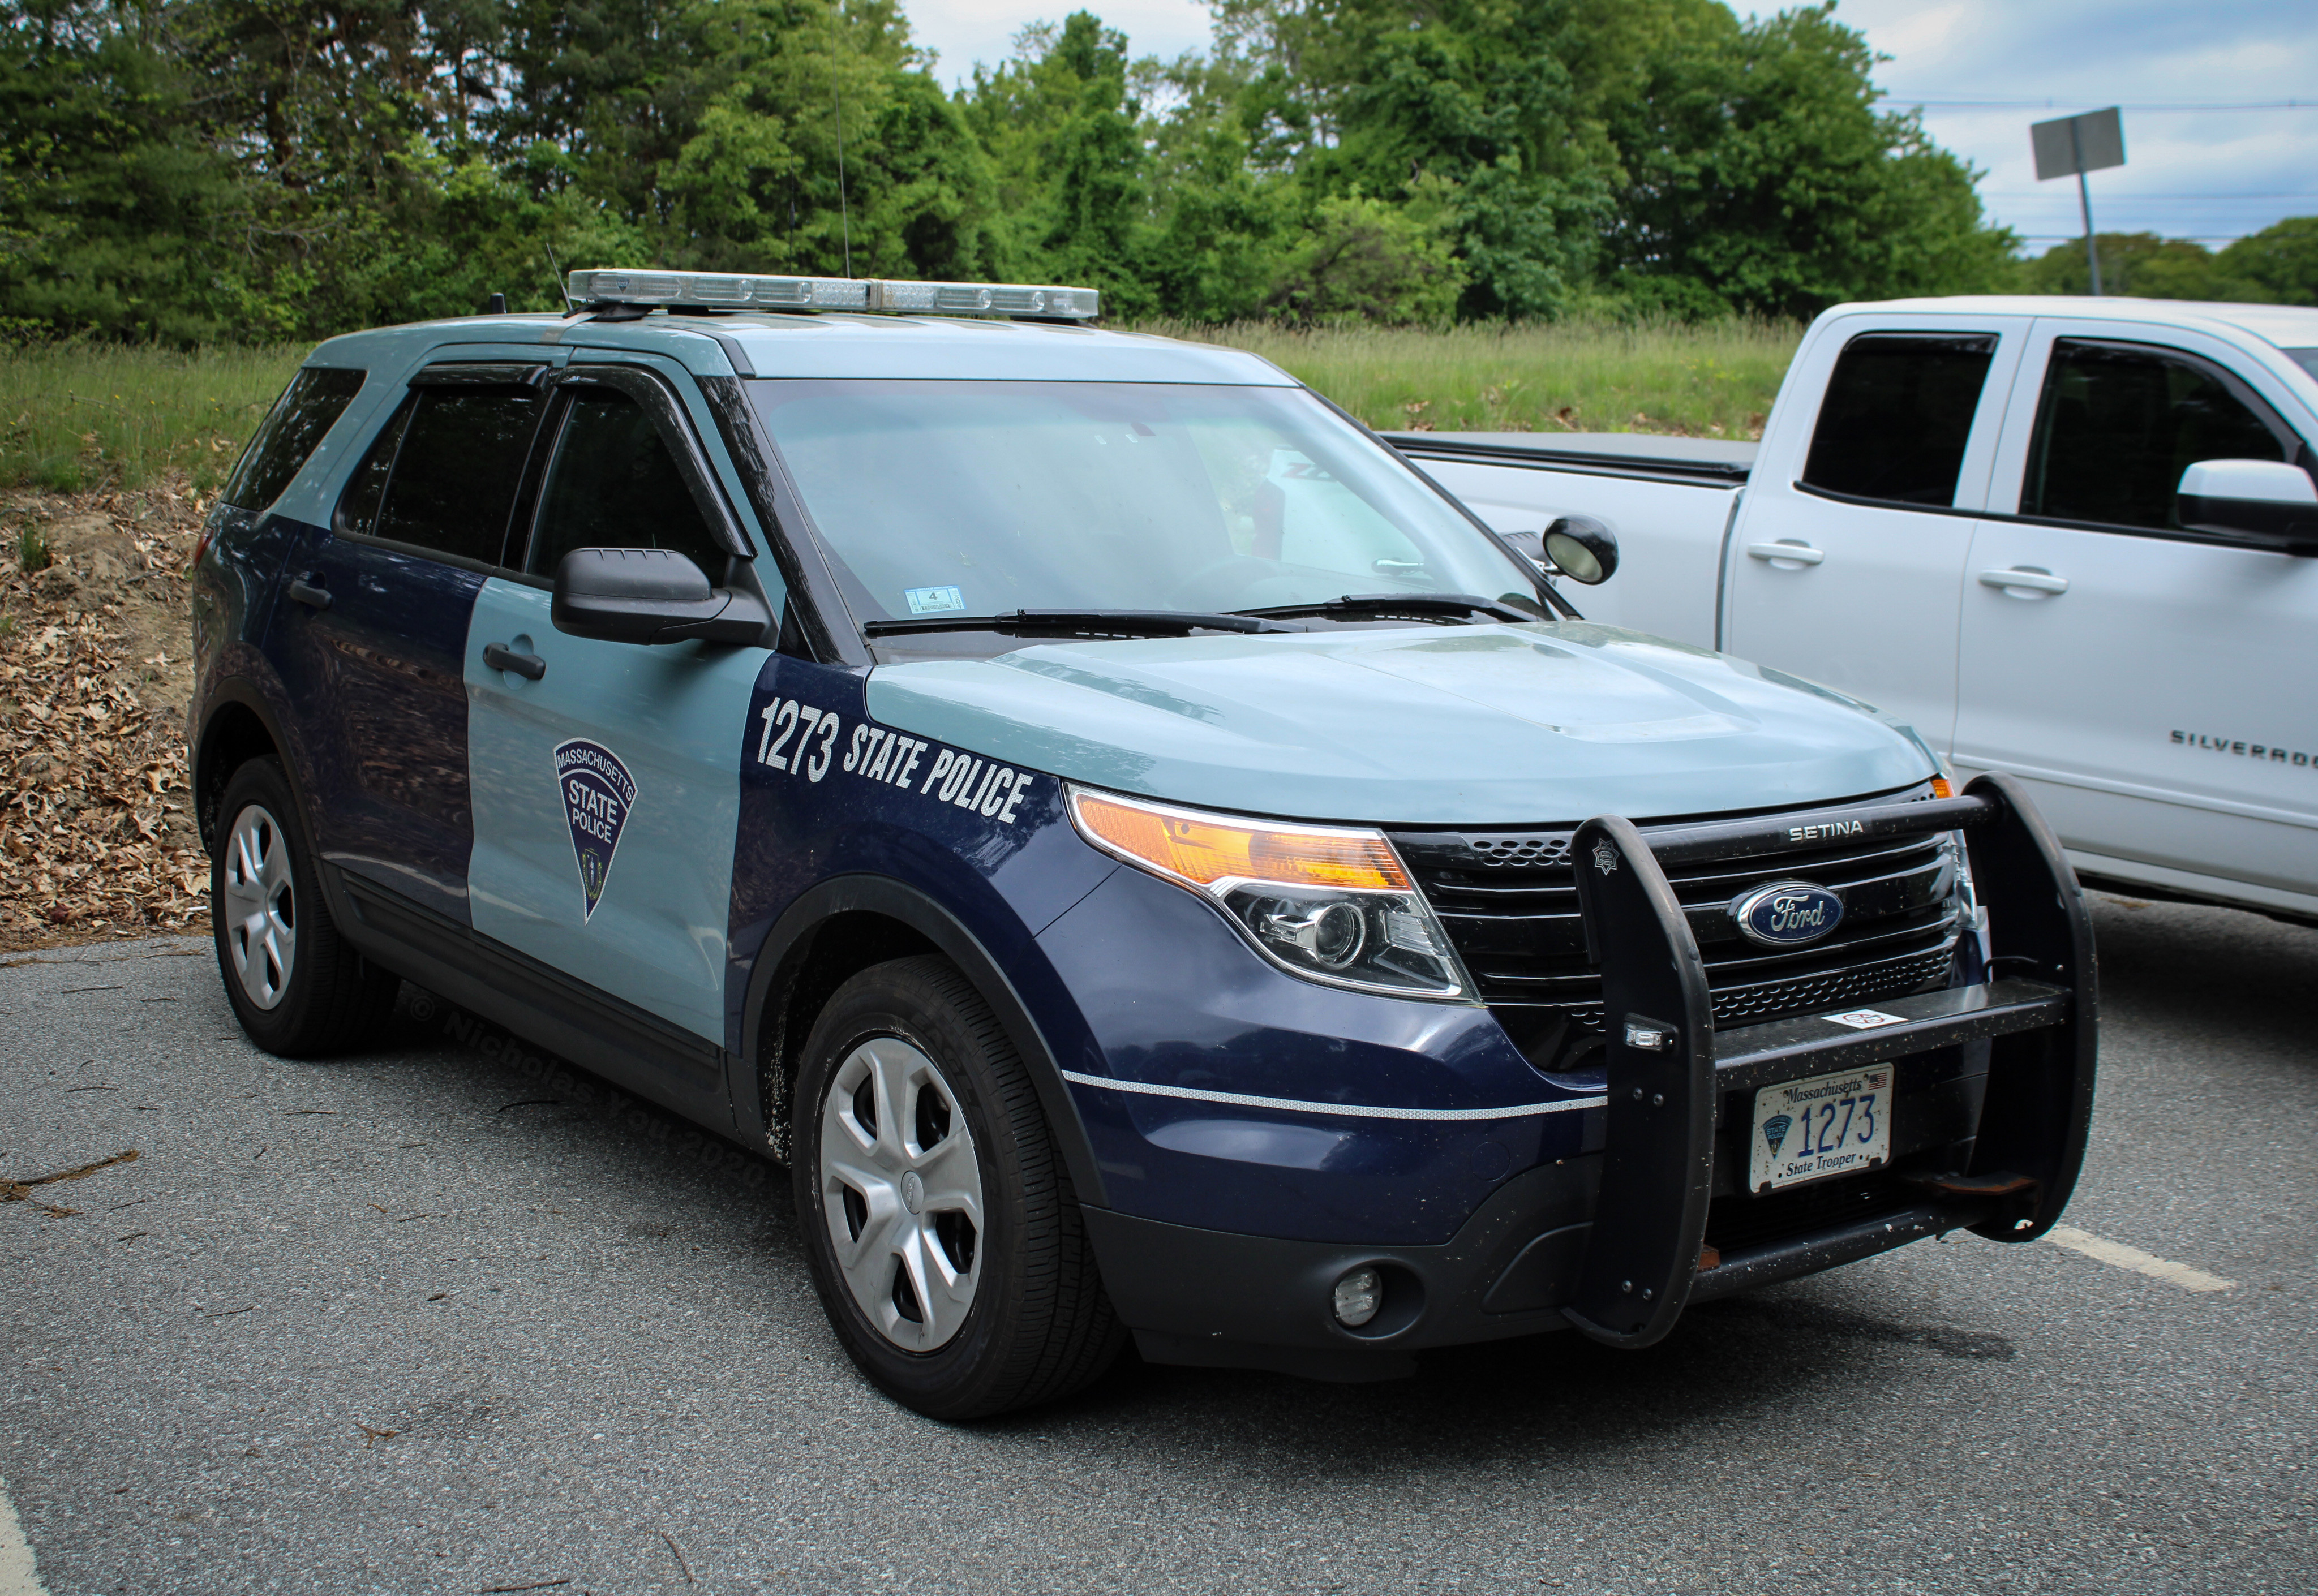 A photo  of Massachusetts State Police
            Cruiser 1273, a 2015 Ford Police Interceptor Utility             taken by Nicholas You